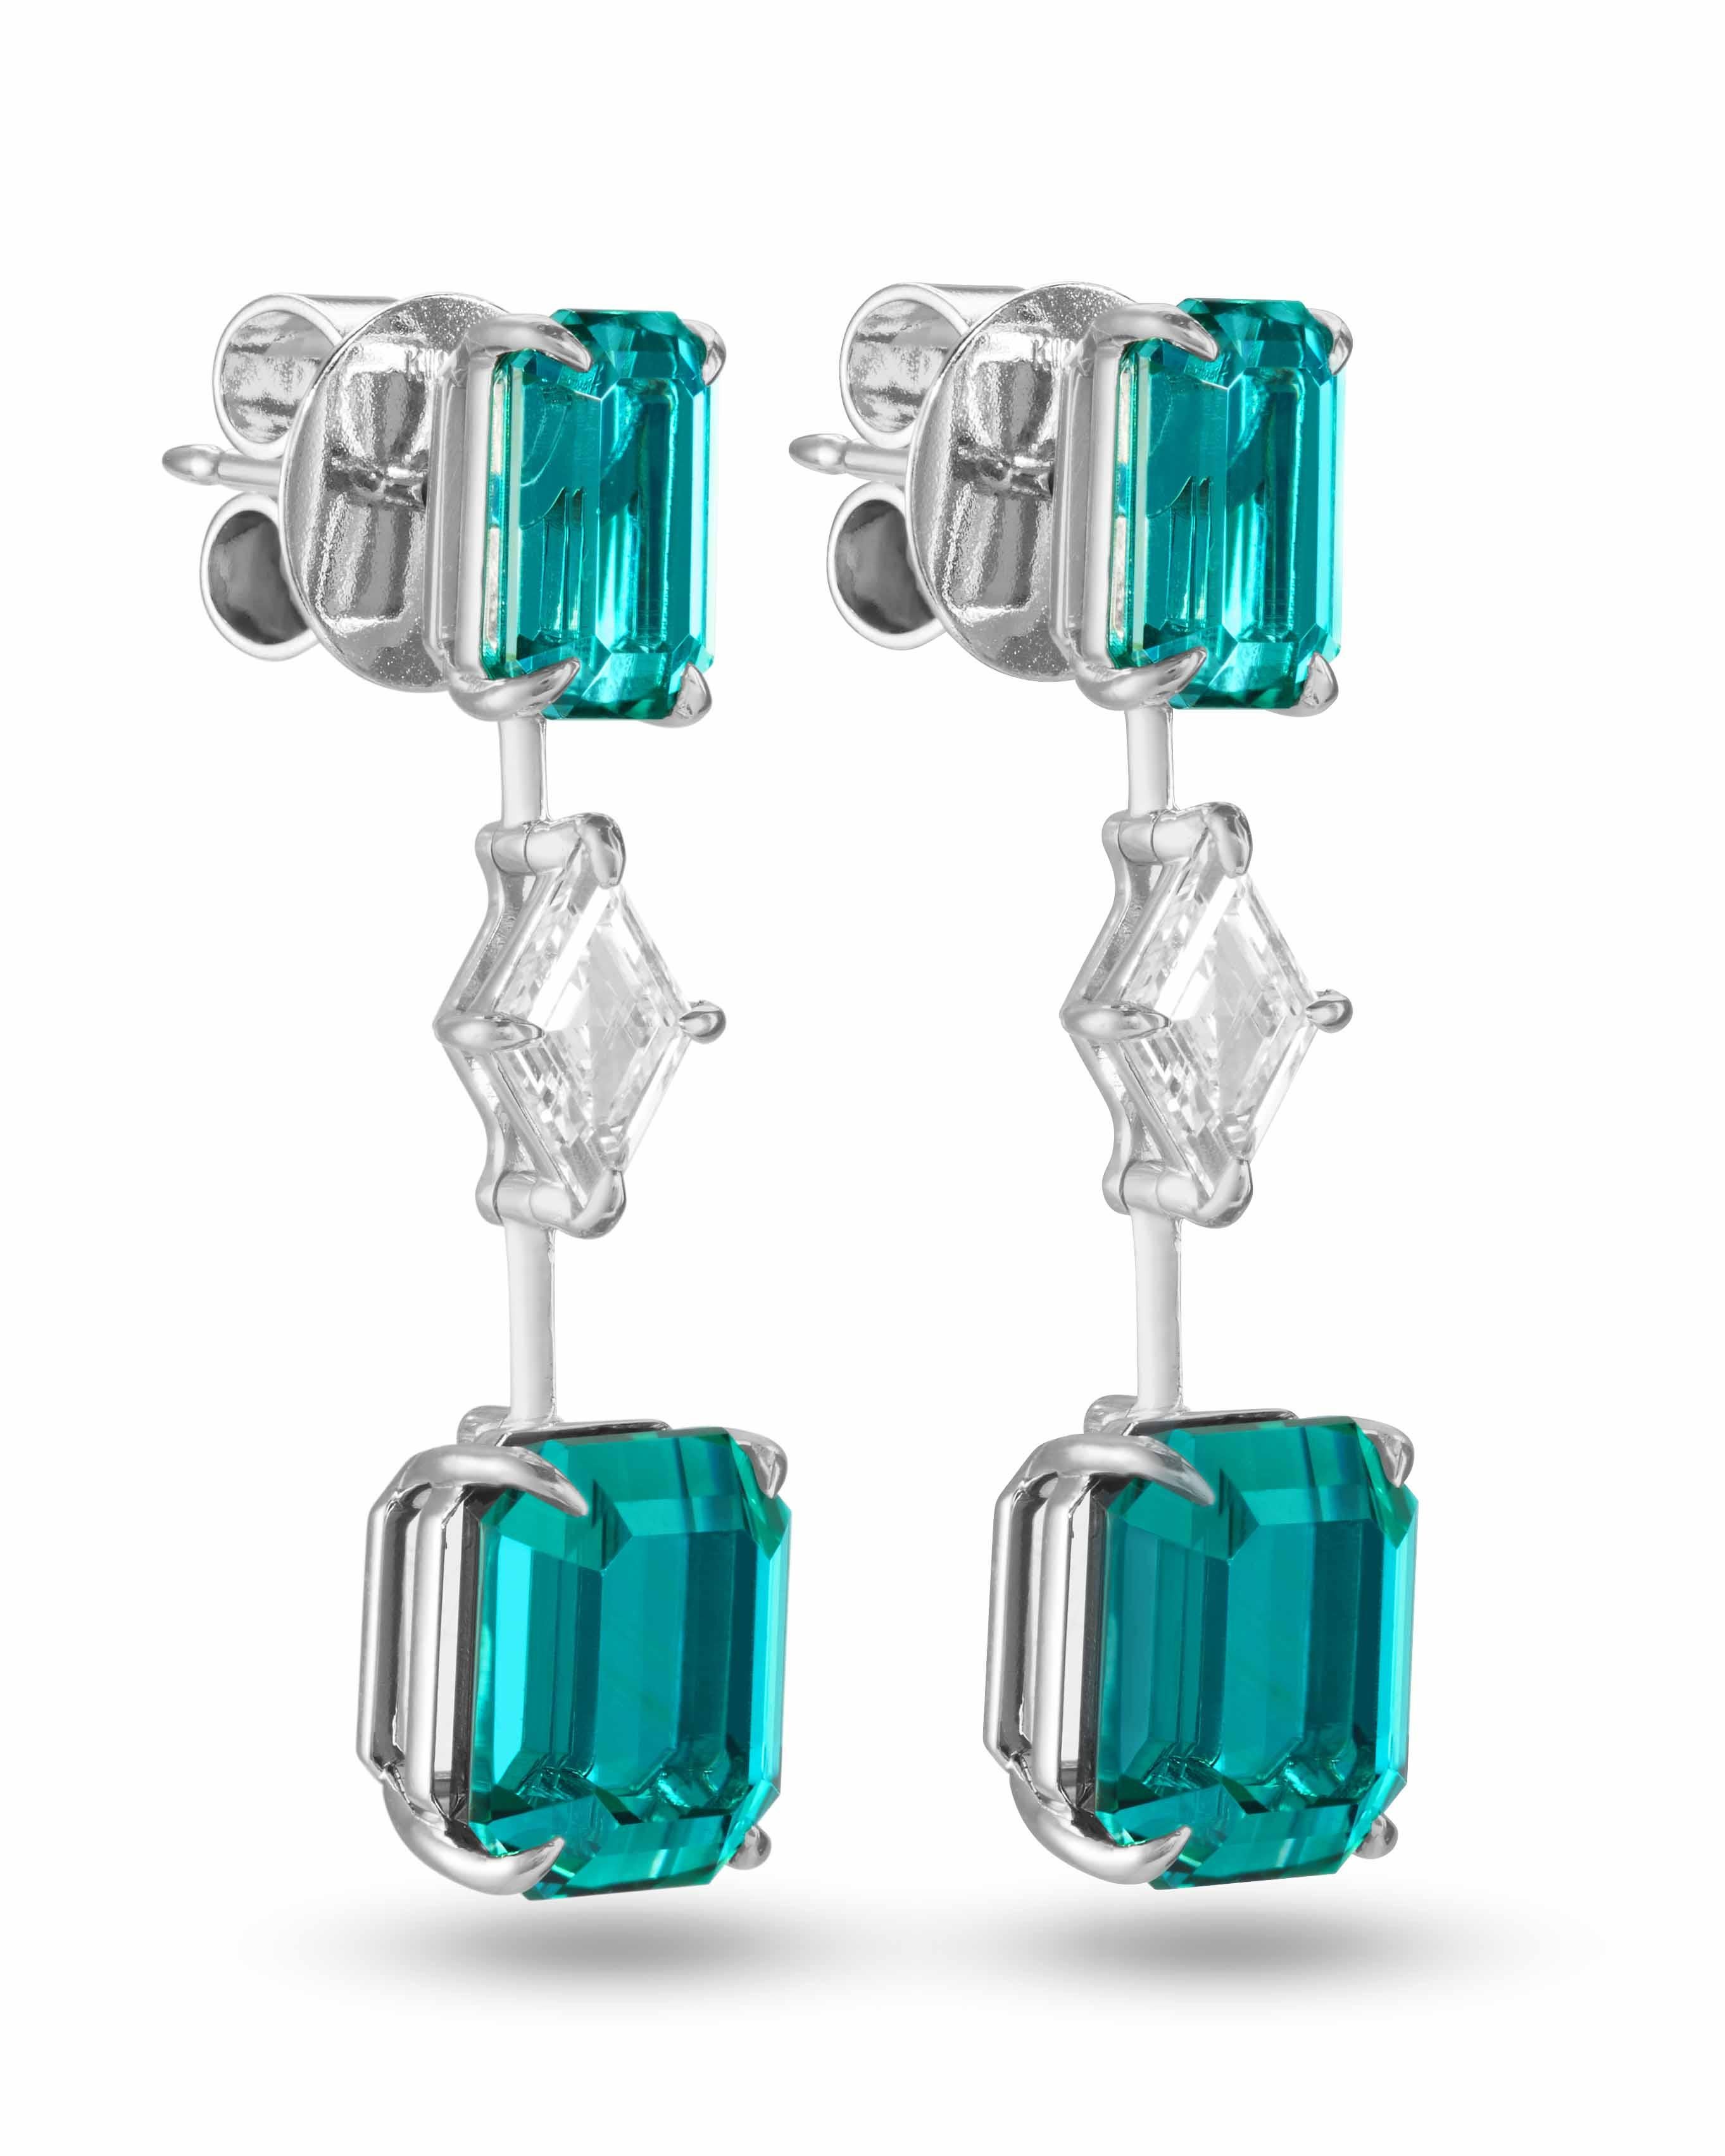 Featured in British VOGUE Jewellery Designer Profile June 2023 issue.
From the One-of-a-Kind collection, each LAGOON earring has two emerald-cut vibrant lagoon tourmalines with neon-like color and one lozenge-cut diamond set in an 18K white gold